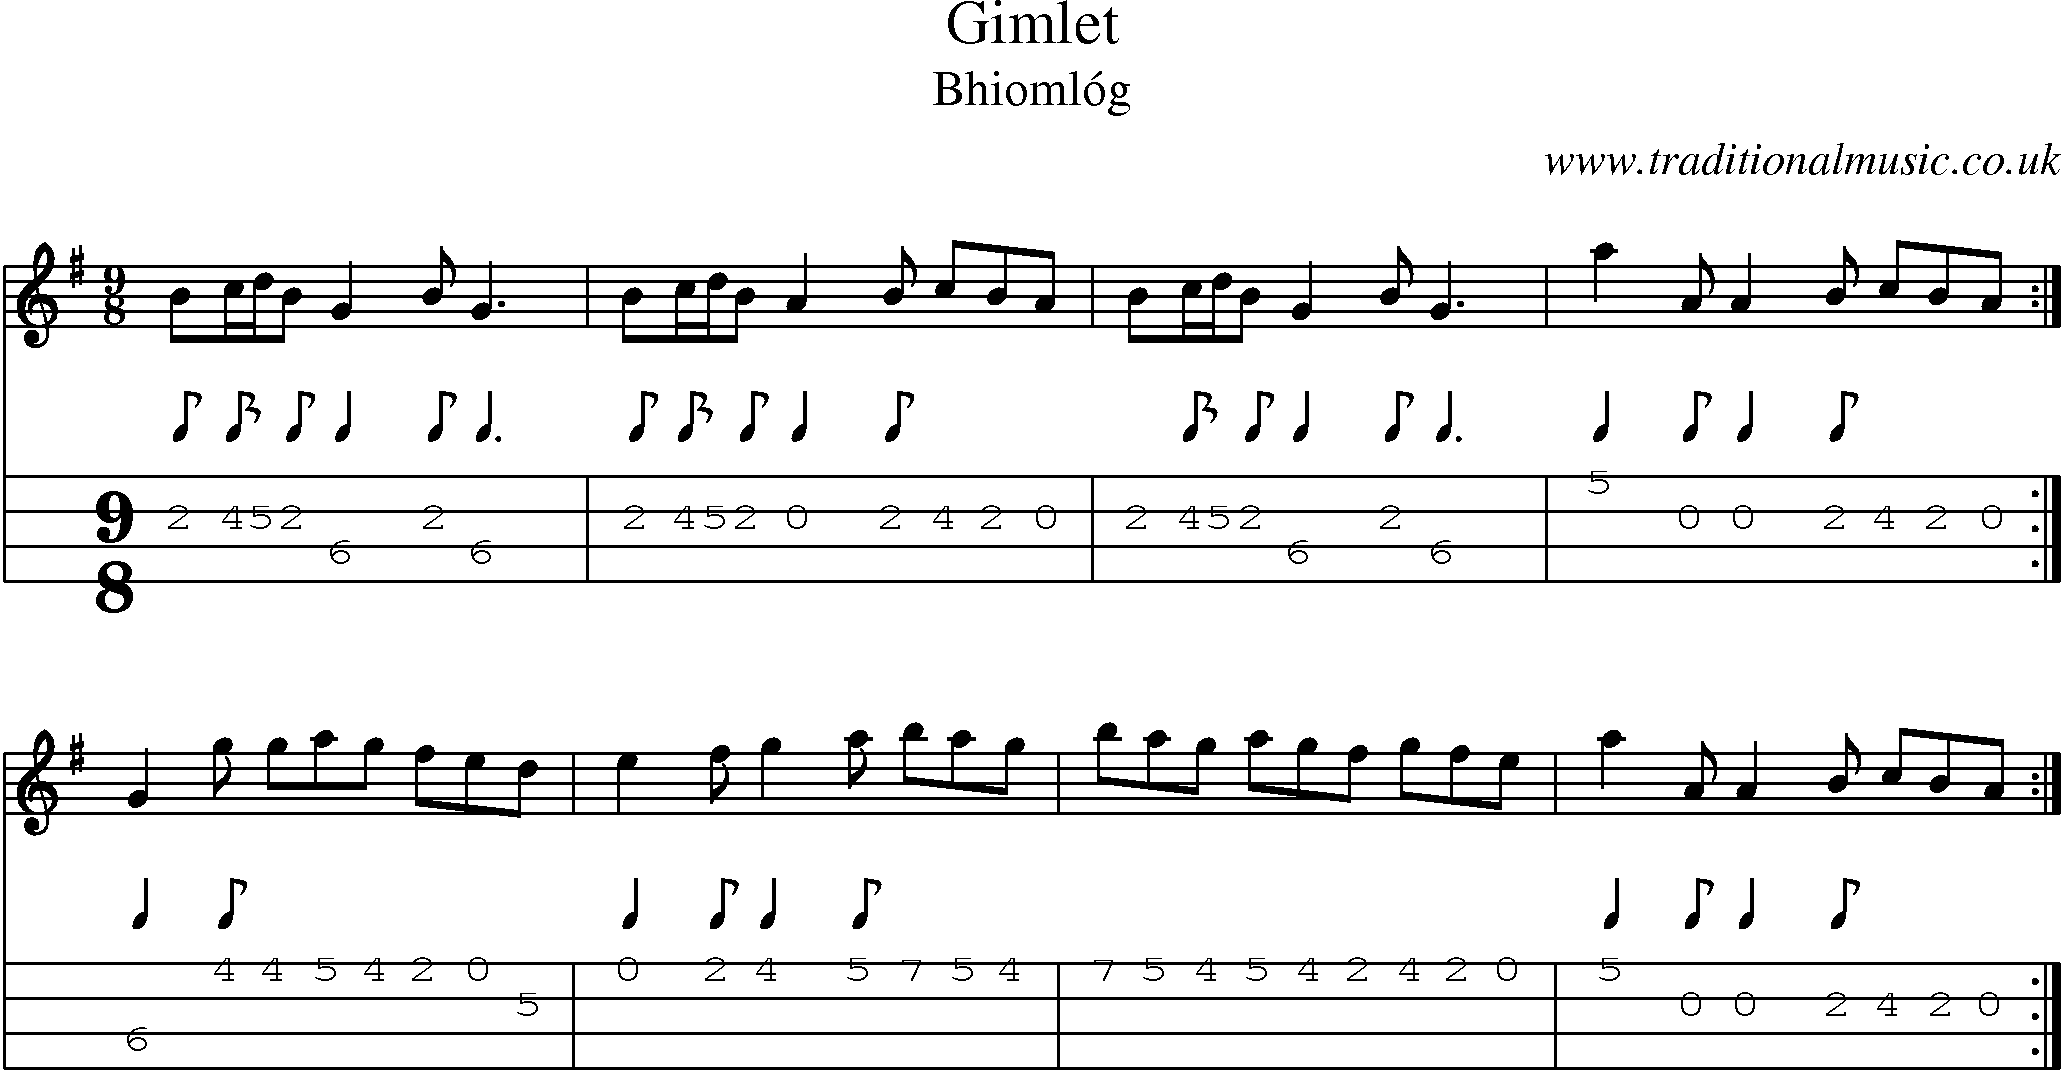 Music Score and Mandolin Tabs for Gimlet